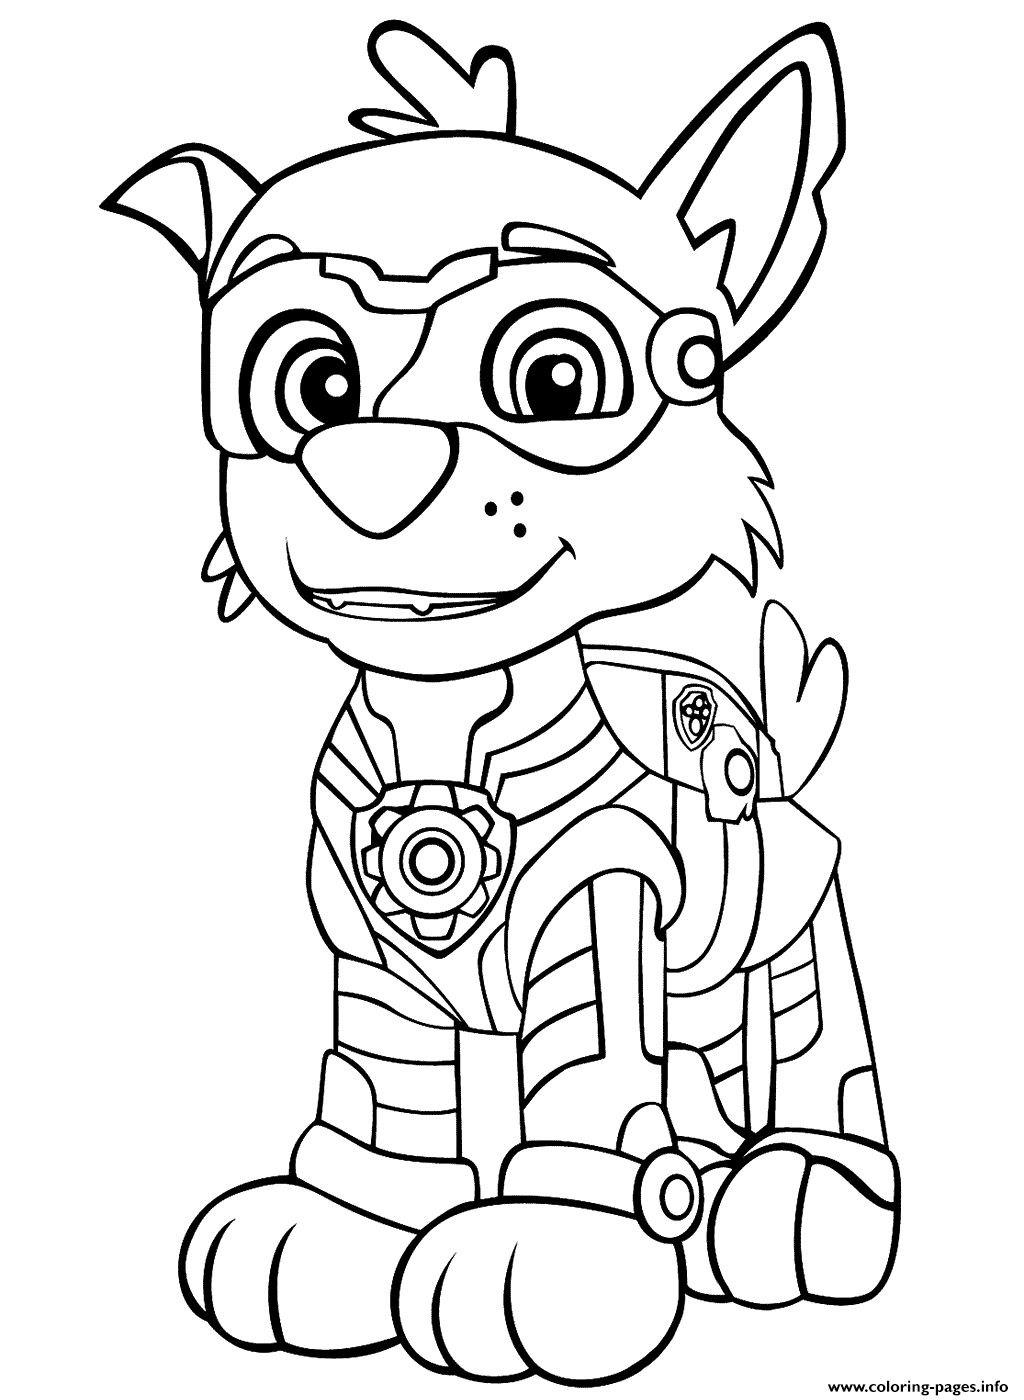 Paw Patrol Coloring Pages FREE Printable 46